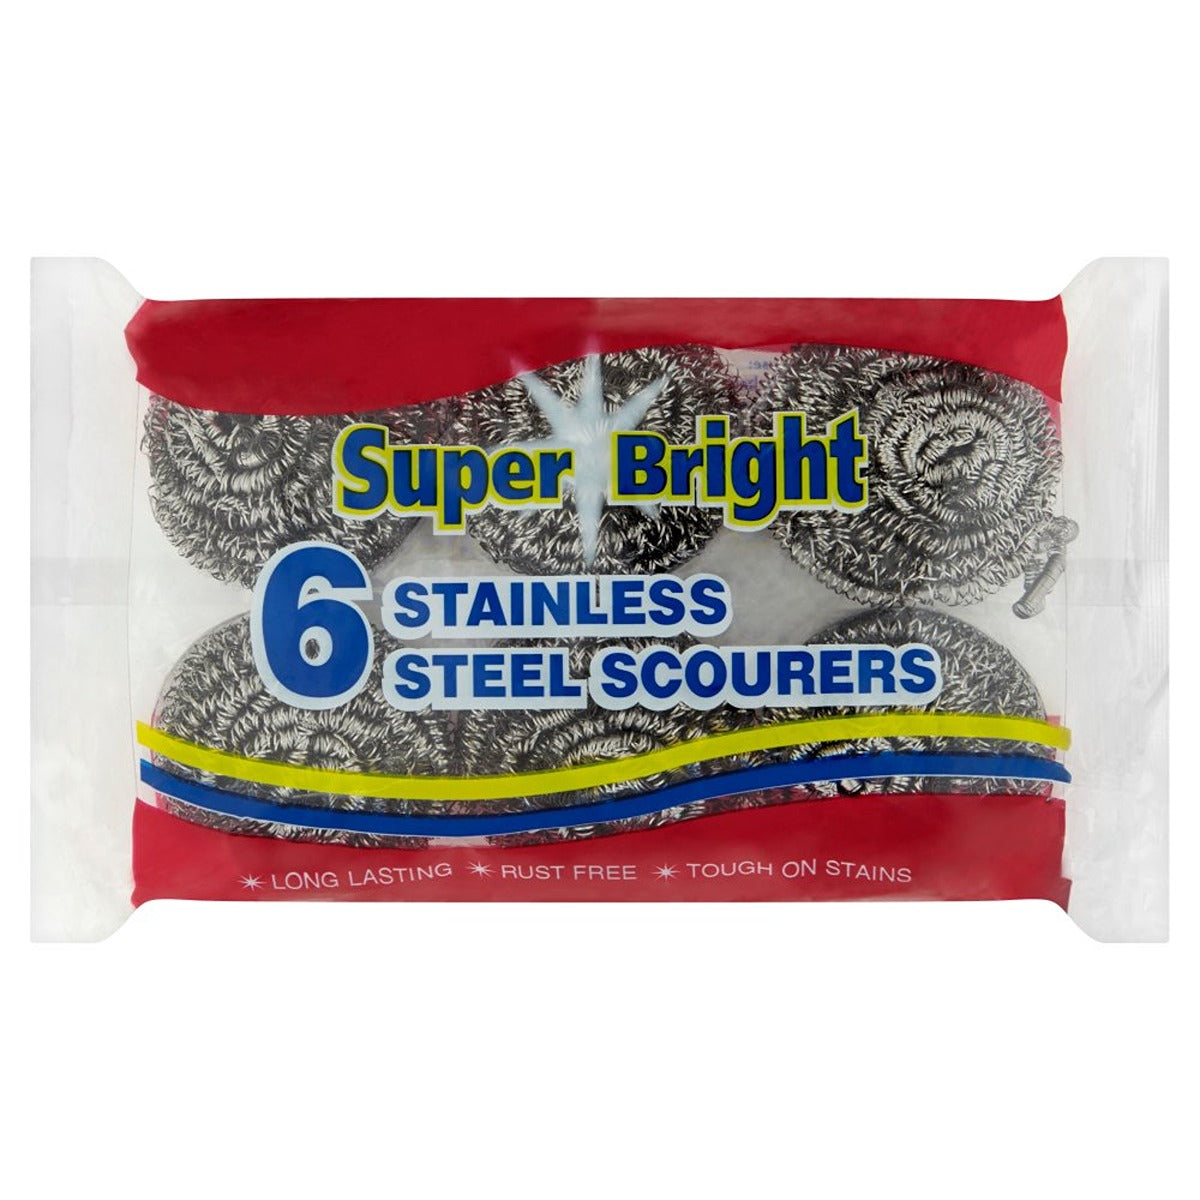 Super Bright - Stainless Steel Scourers - 6 pack - Continental Food Store